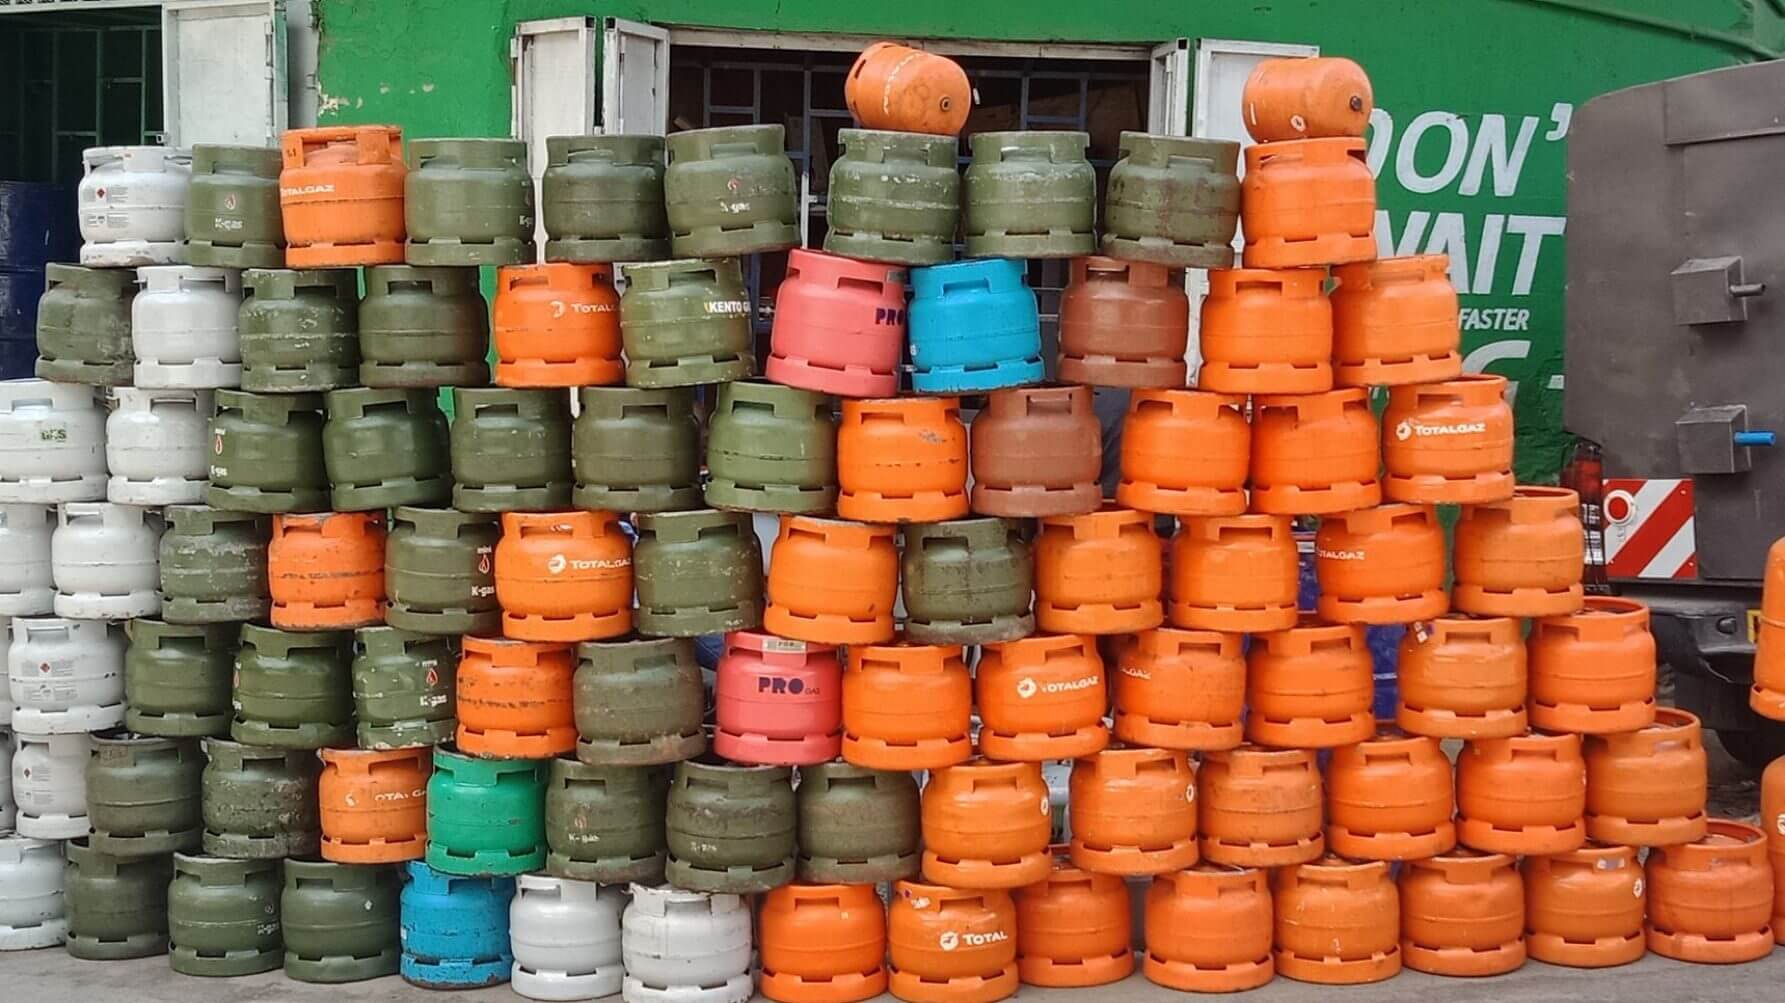 Government to Provide Free Gas Cylinders for Low-Income Homes, Says CS Chirchir